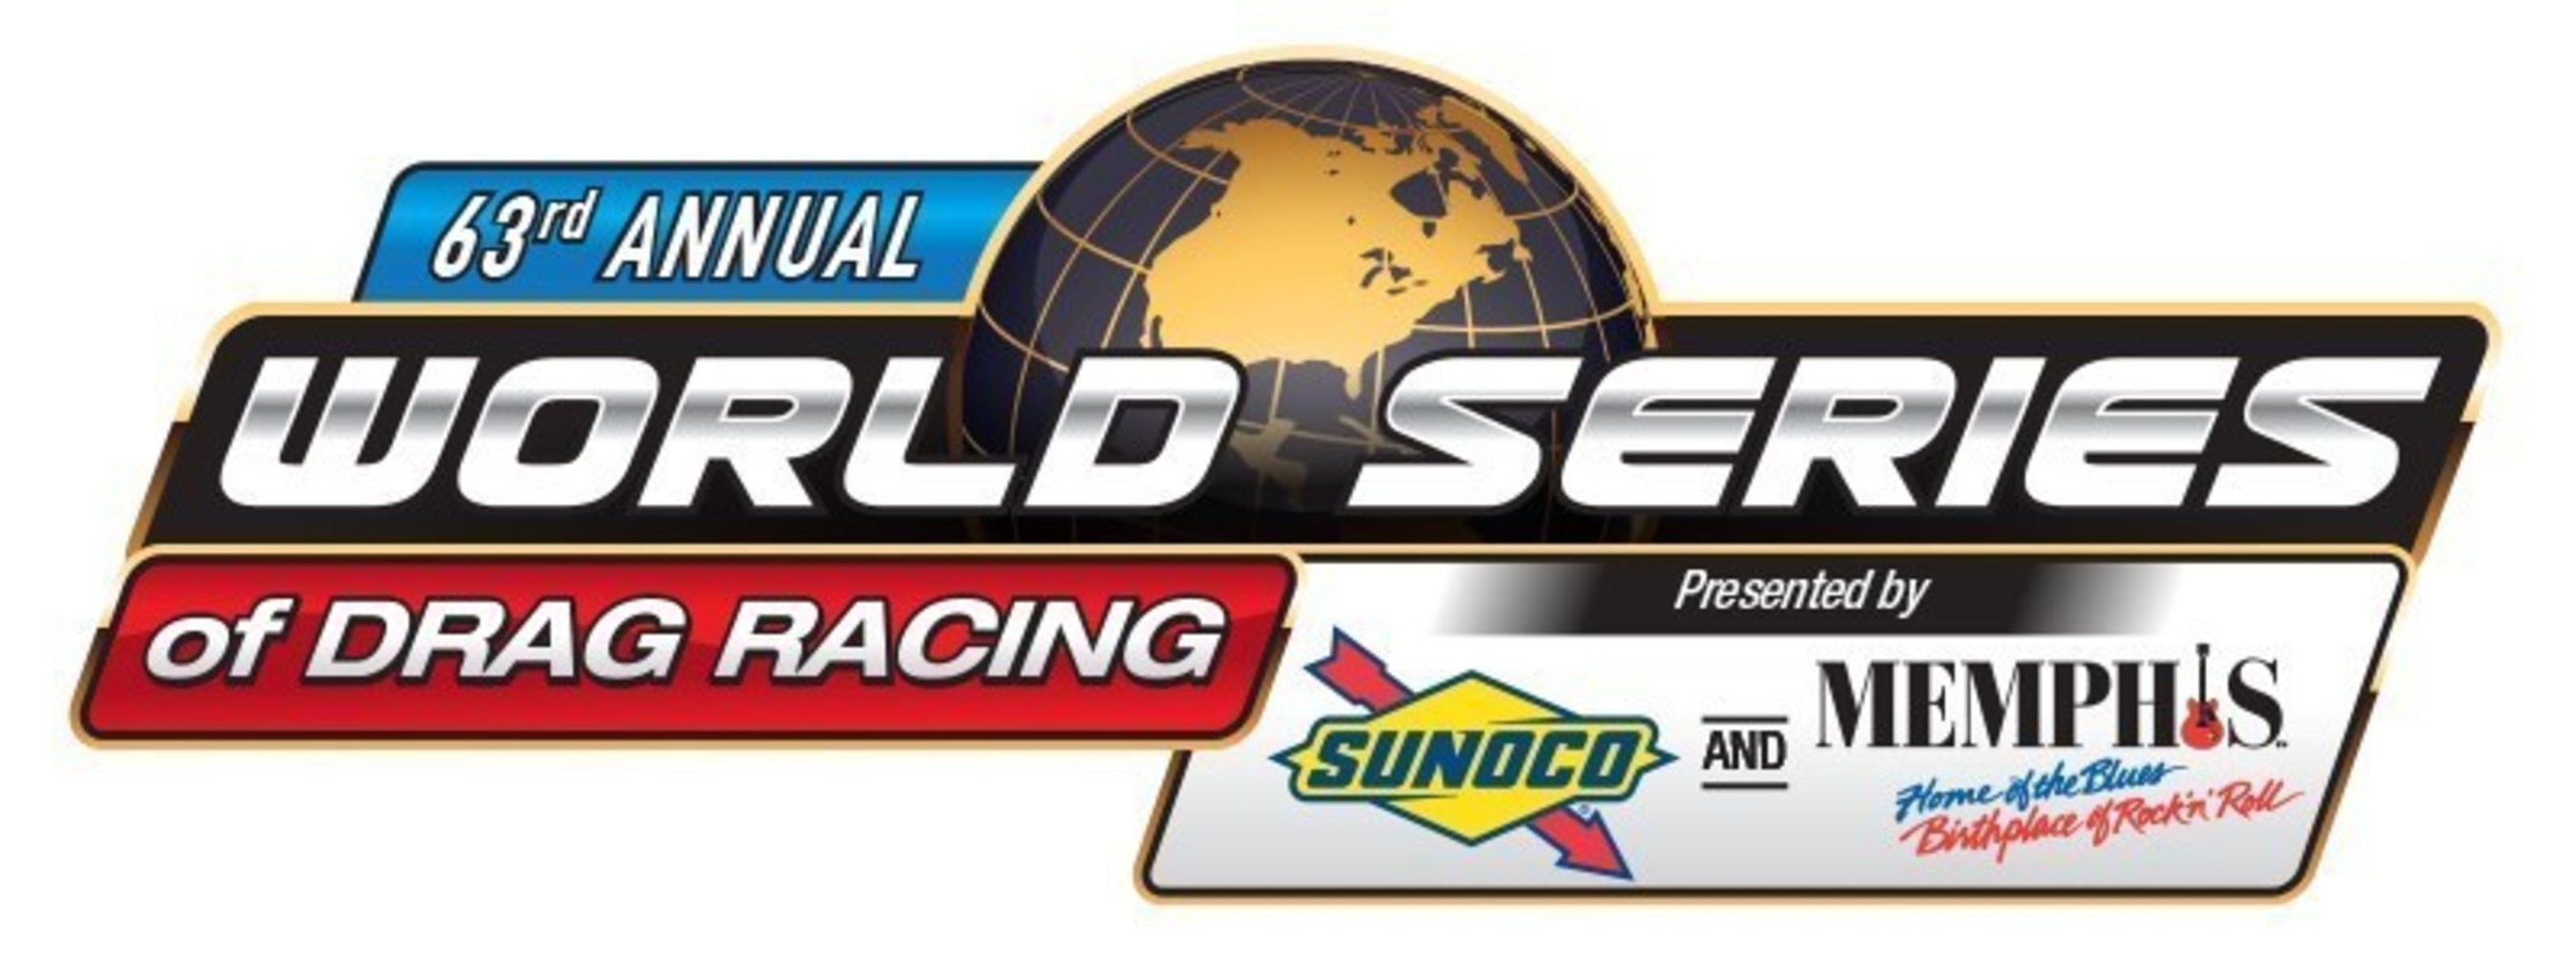 World Series of Drag Racing Announces Strong Sponsor Line-up for the 63rd Running of the Prestigious Event